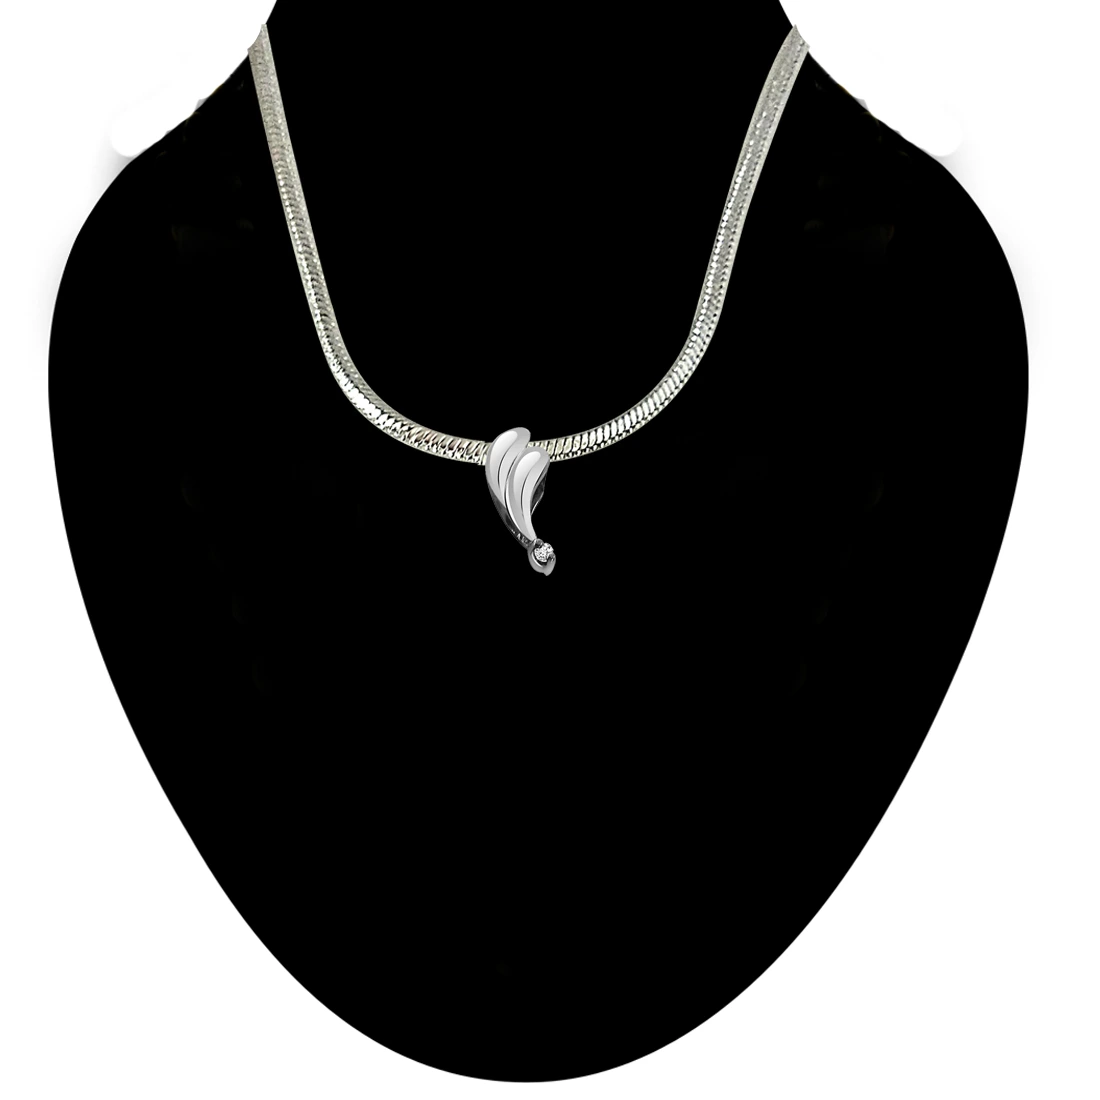 Elegant Silver Pendant - Real Diamond & Sterling Silver Pendant with 18 IN Chain (SDP39)